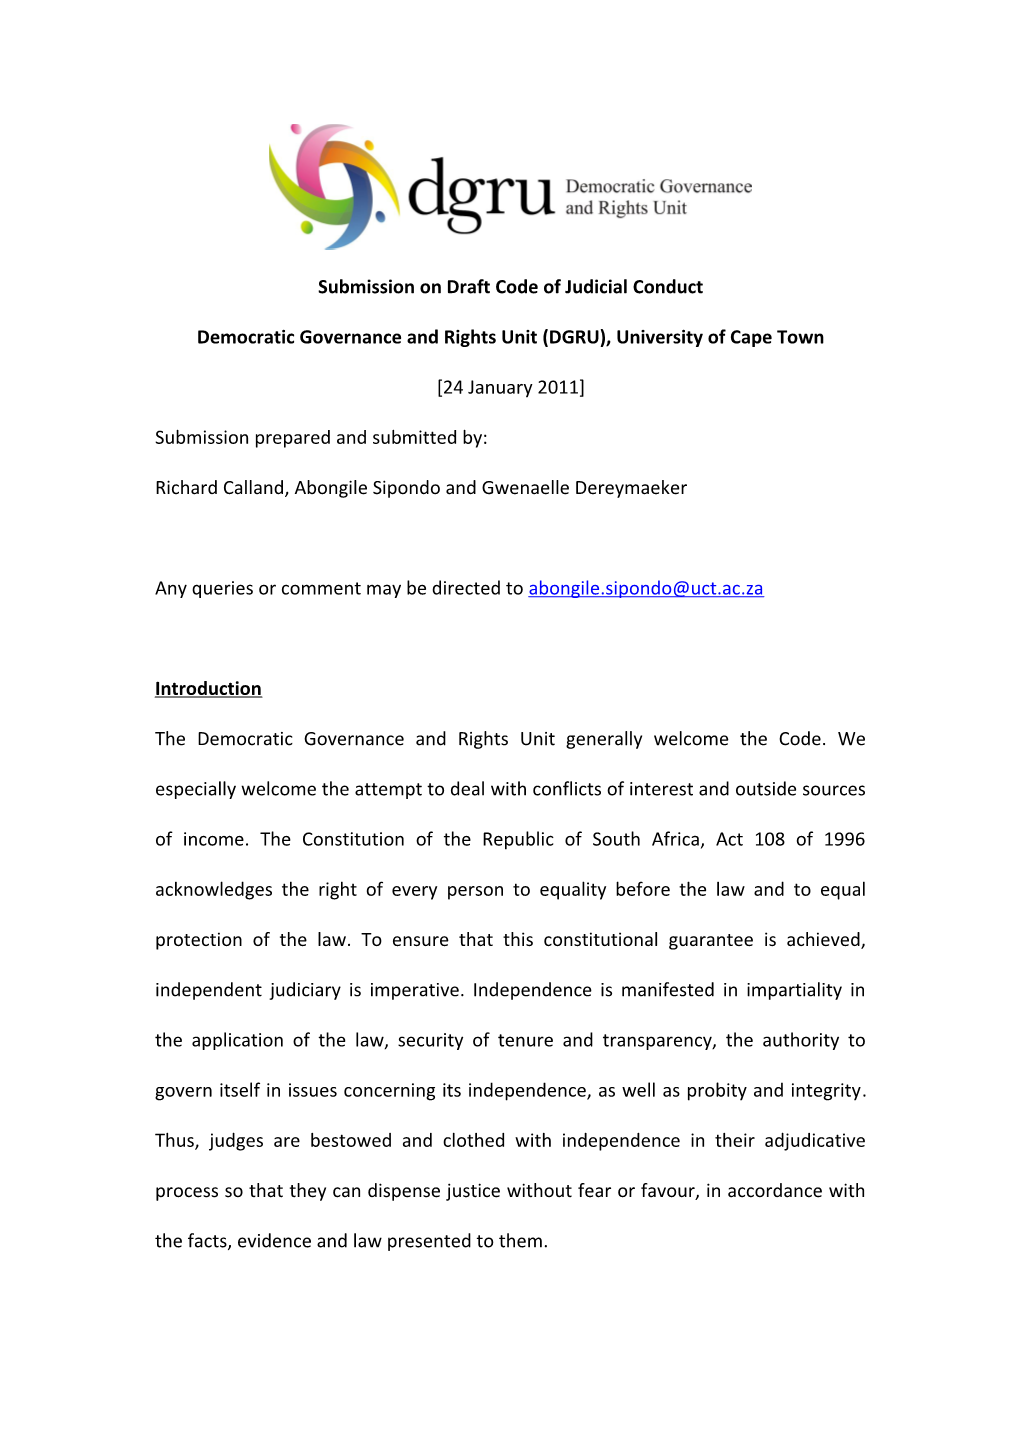 The Constitution of the Republic of South Africa, Act 108 of 1996 Acknowledges the Right